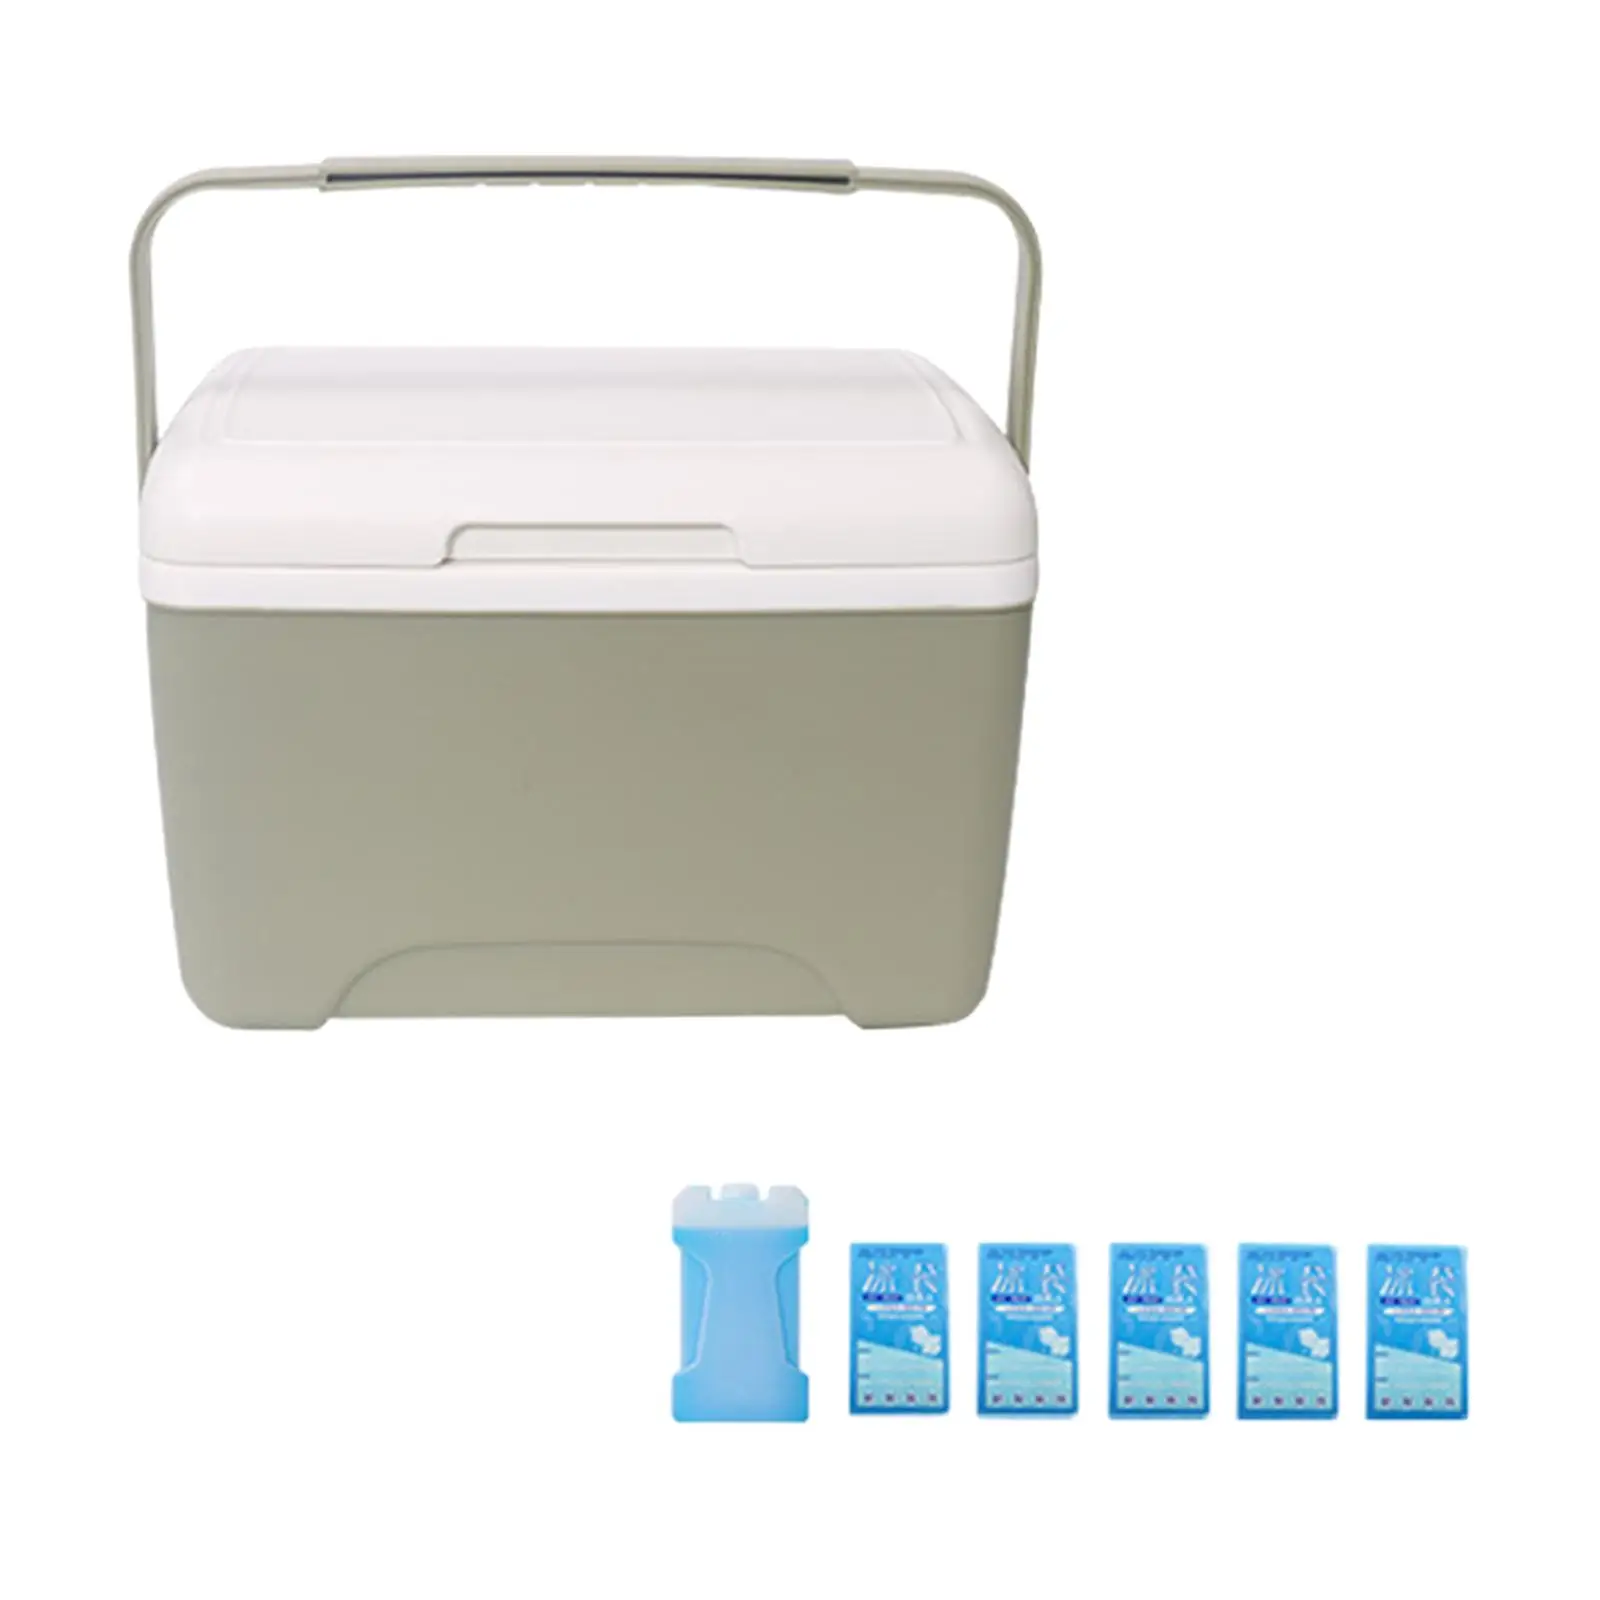 8L Insulated Portable Cooler Insulated Thermal Cooler Lunch Container Ice Box